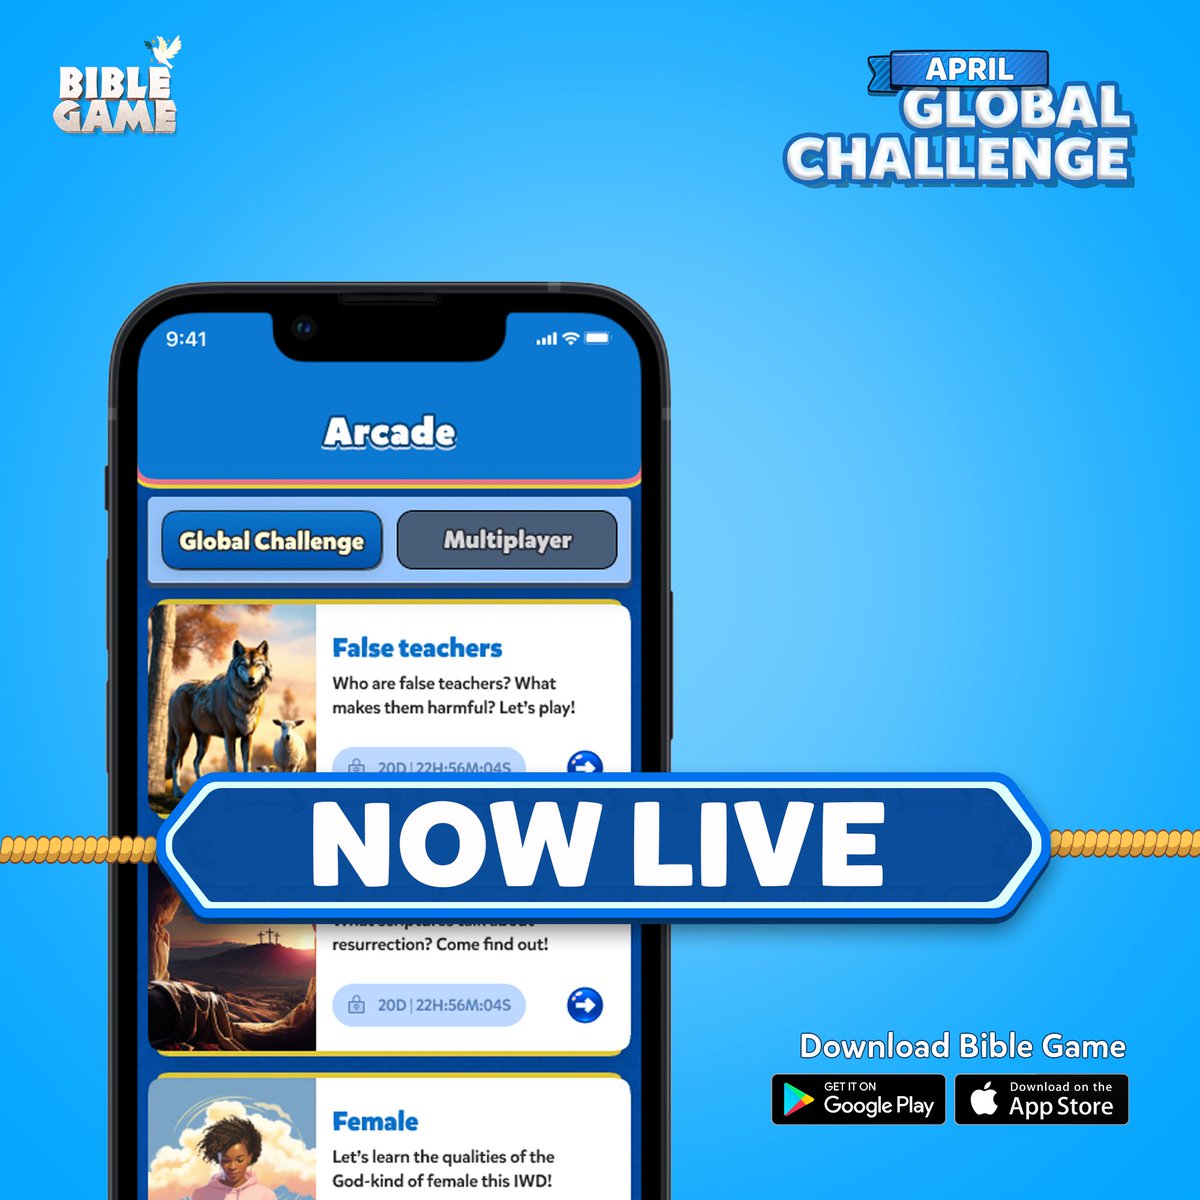 April Global Challenge is Now Live. 

The time to participate is now. Don’t postpone. Do it NOW! 

See you on the leaderboard 

#Biblegame #Globalchallenge